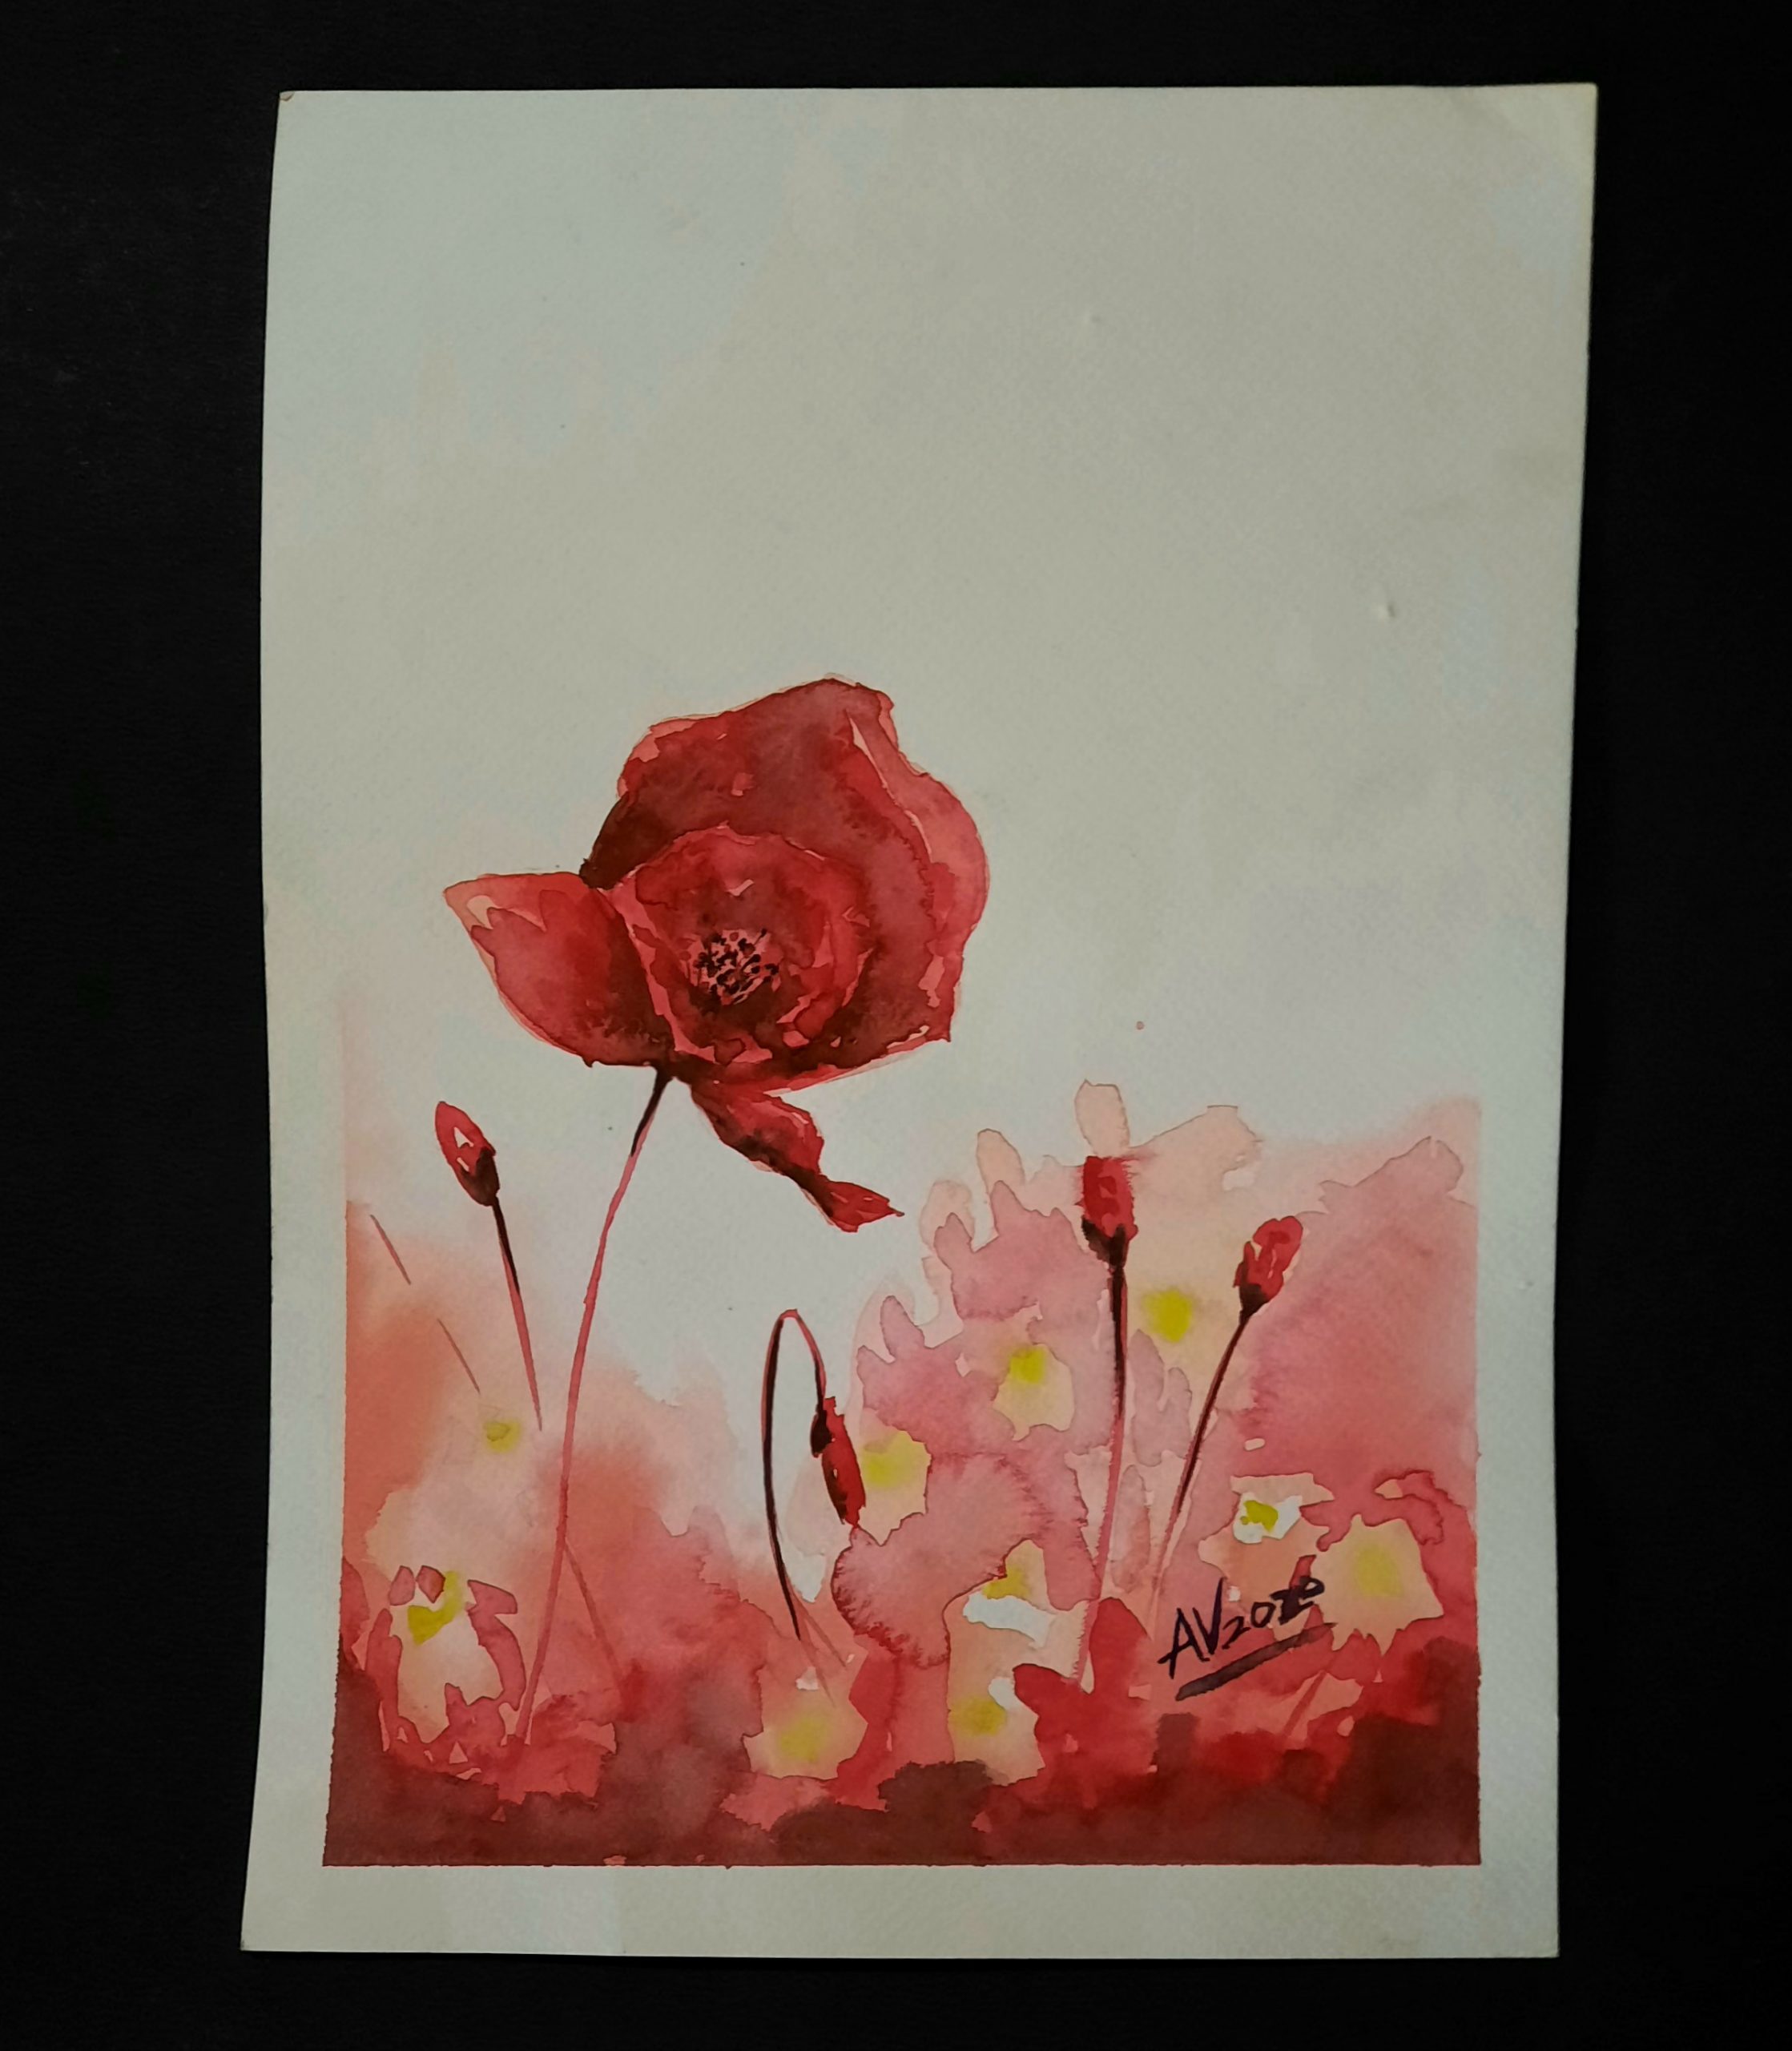 A rose painting